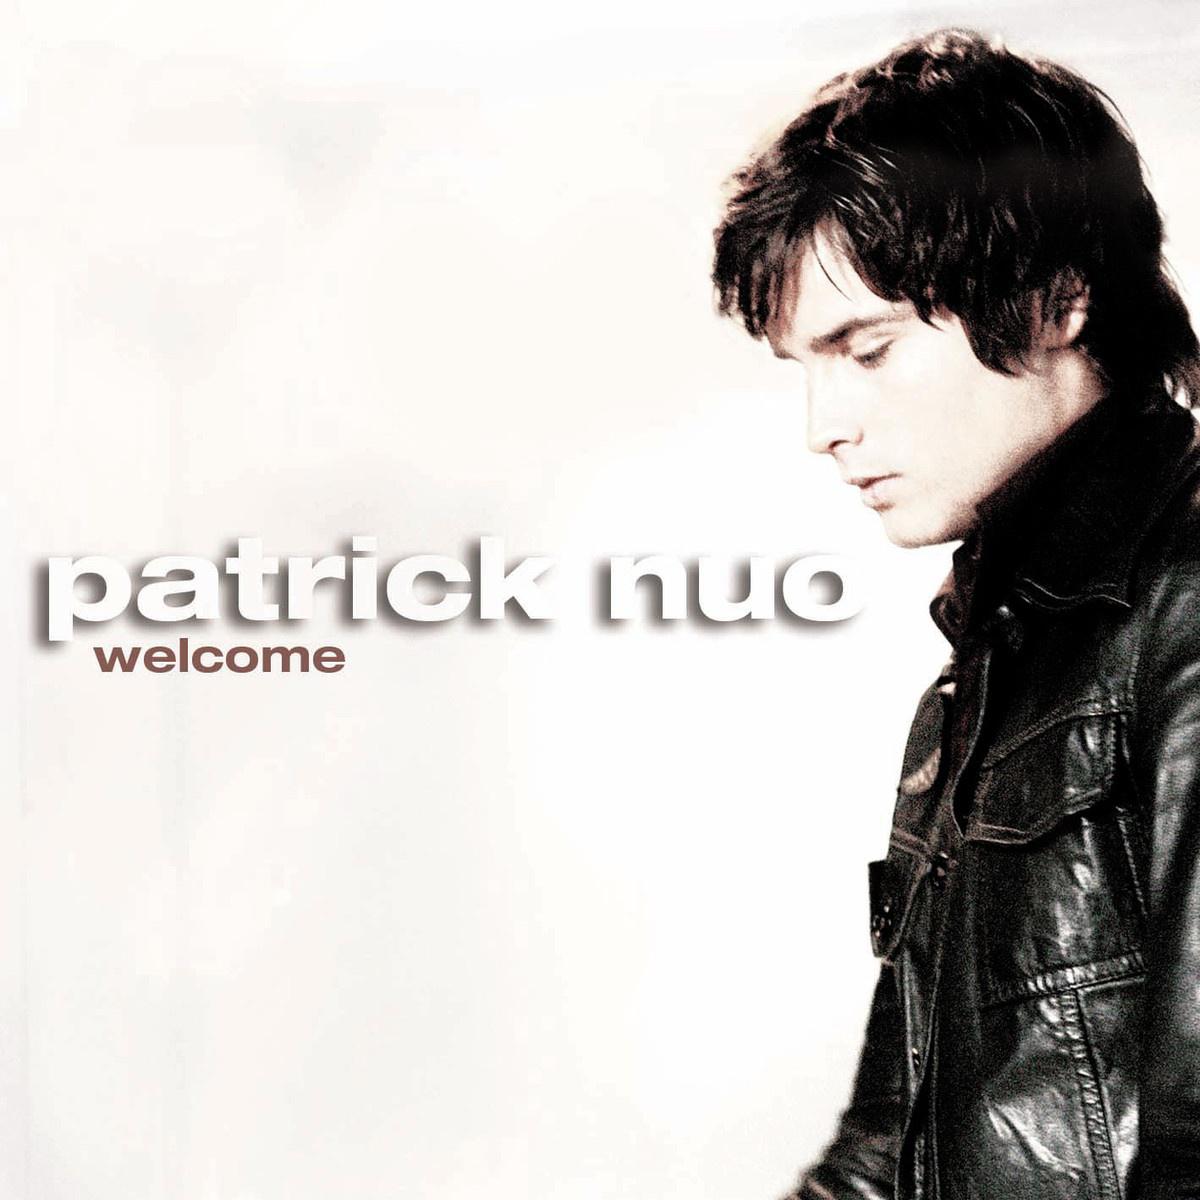 Patrick Nuo - The Air That I Breathe